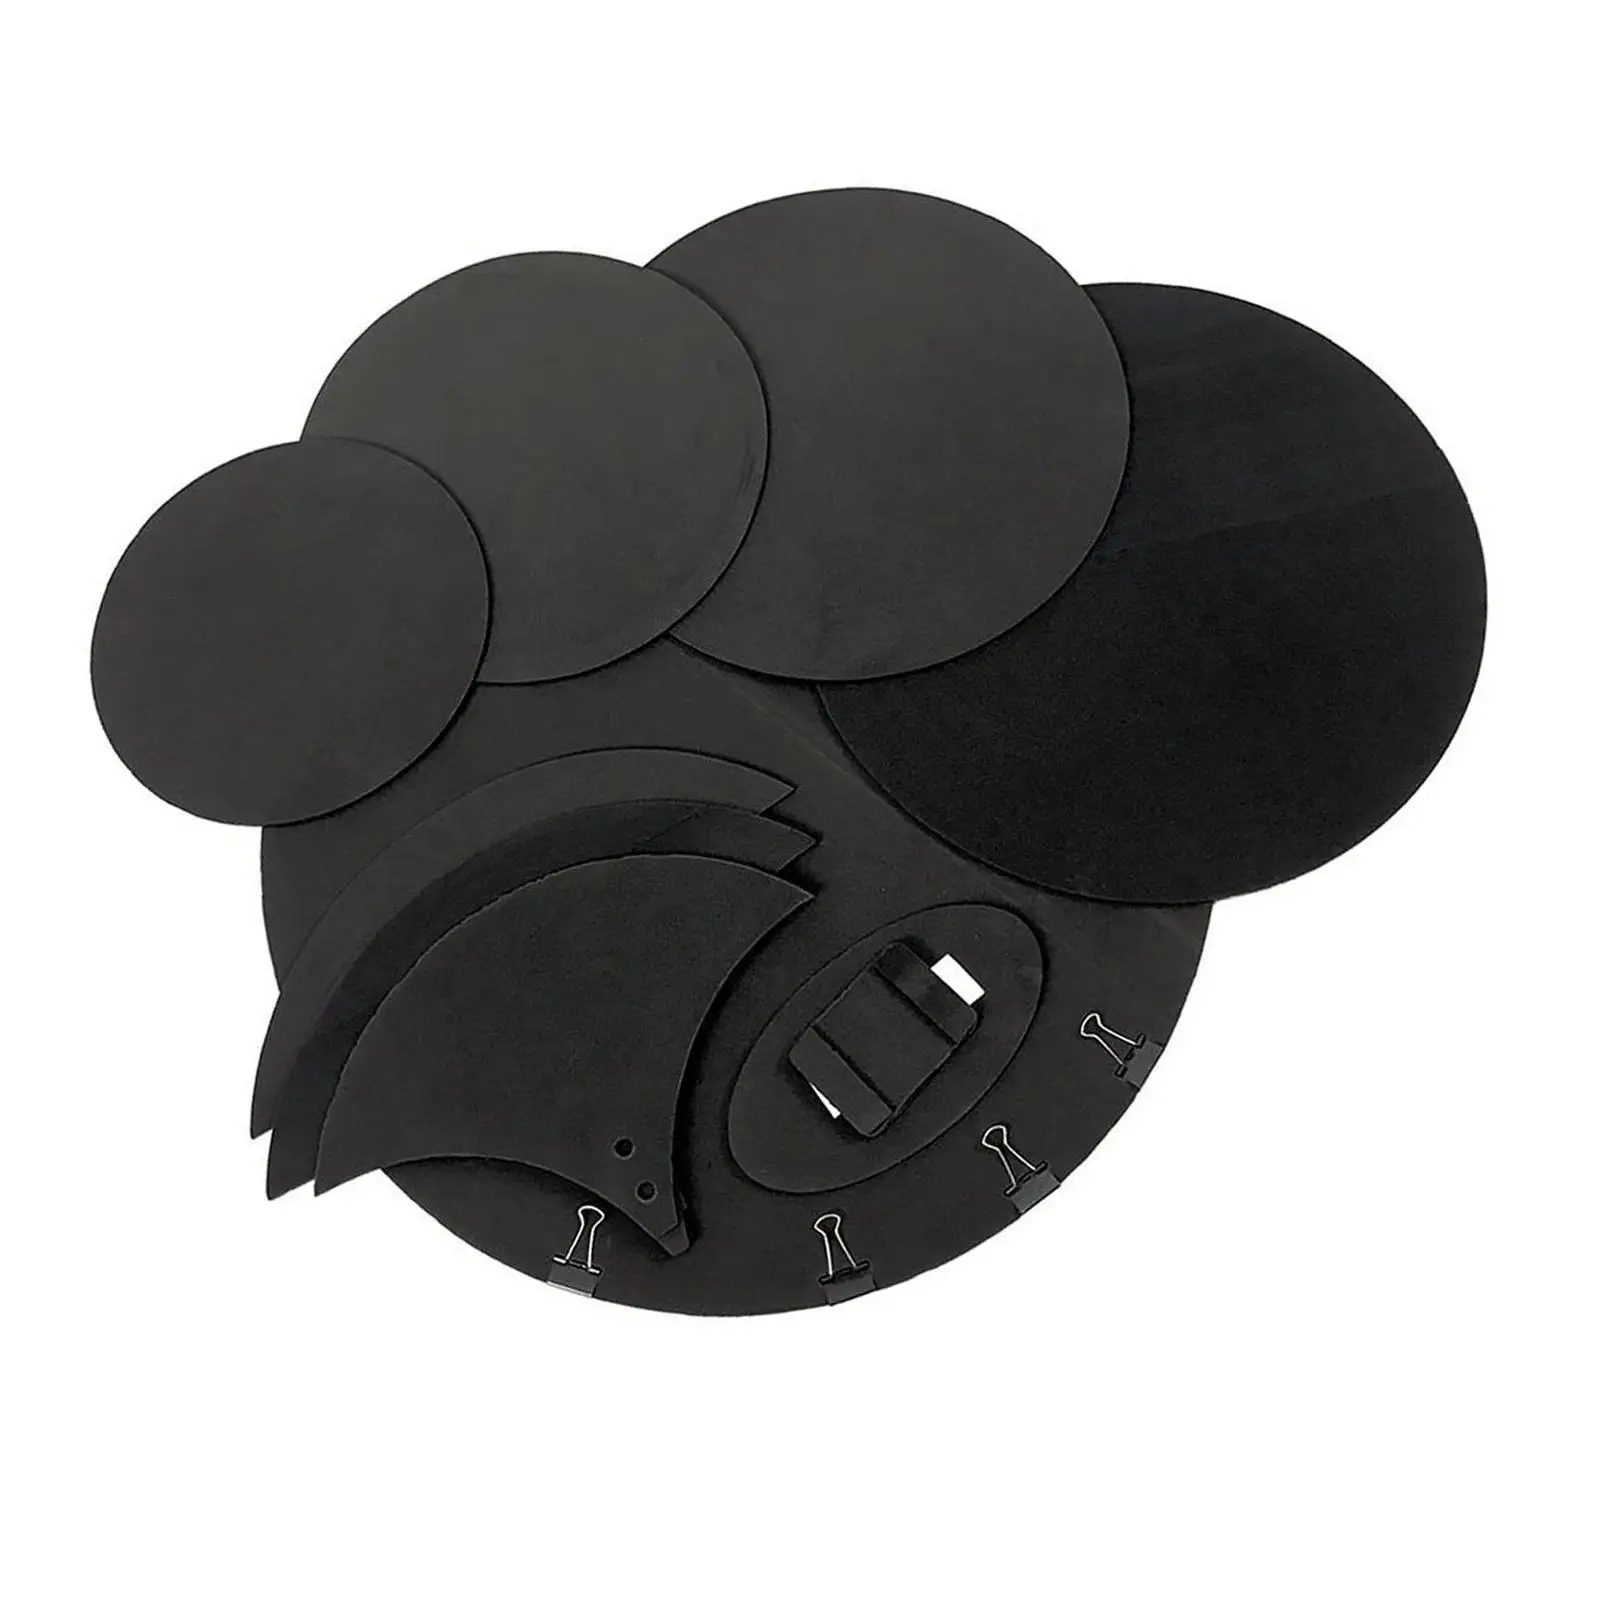 10Pcs Drum Mutes Hi Hat & 2 Cymbal Mutes Reusable Soft Quiet Practicing Pad Dampener Tone Control Drum Sound Mutes for Rehearsal